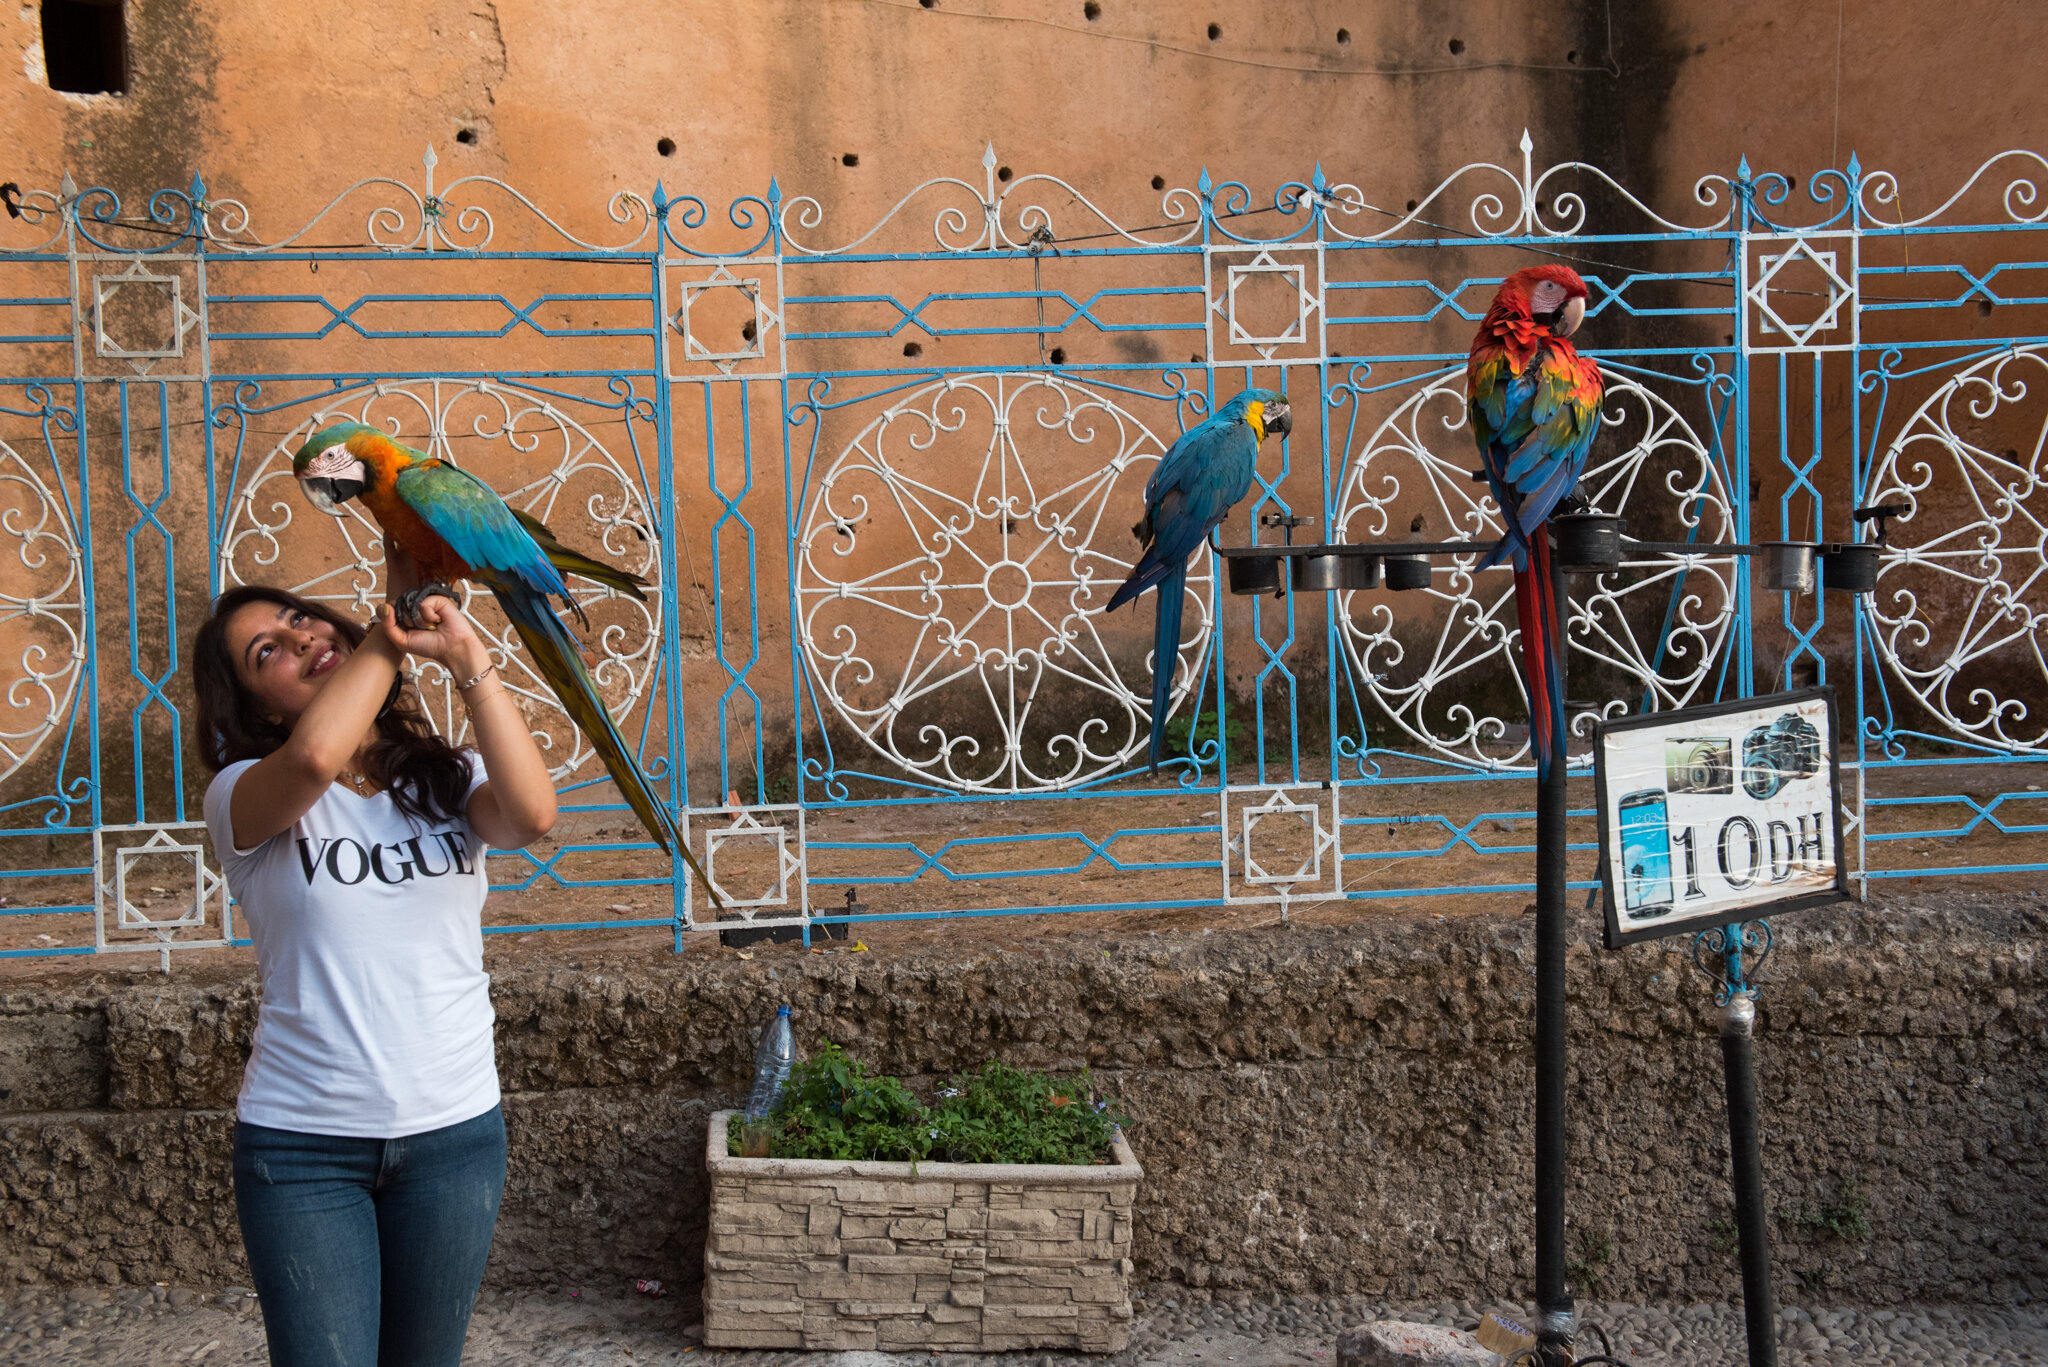    Morocco - Chefchaouen      Tourist having her photo taken with parrot 